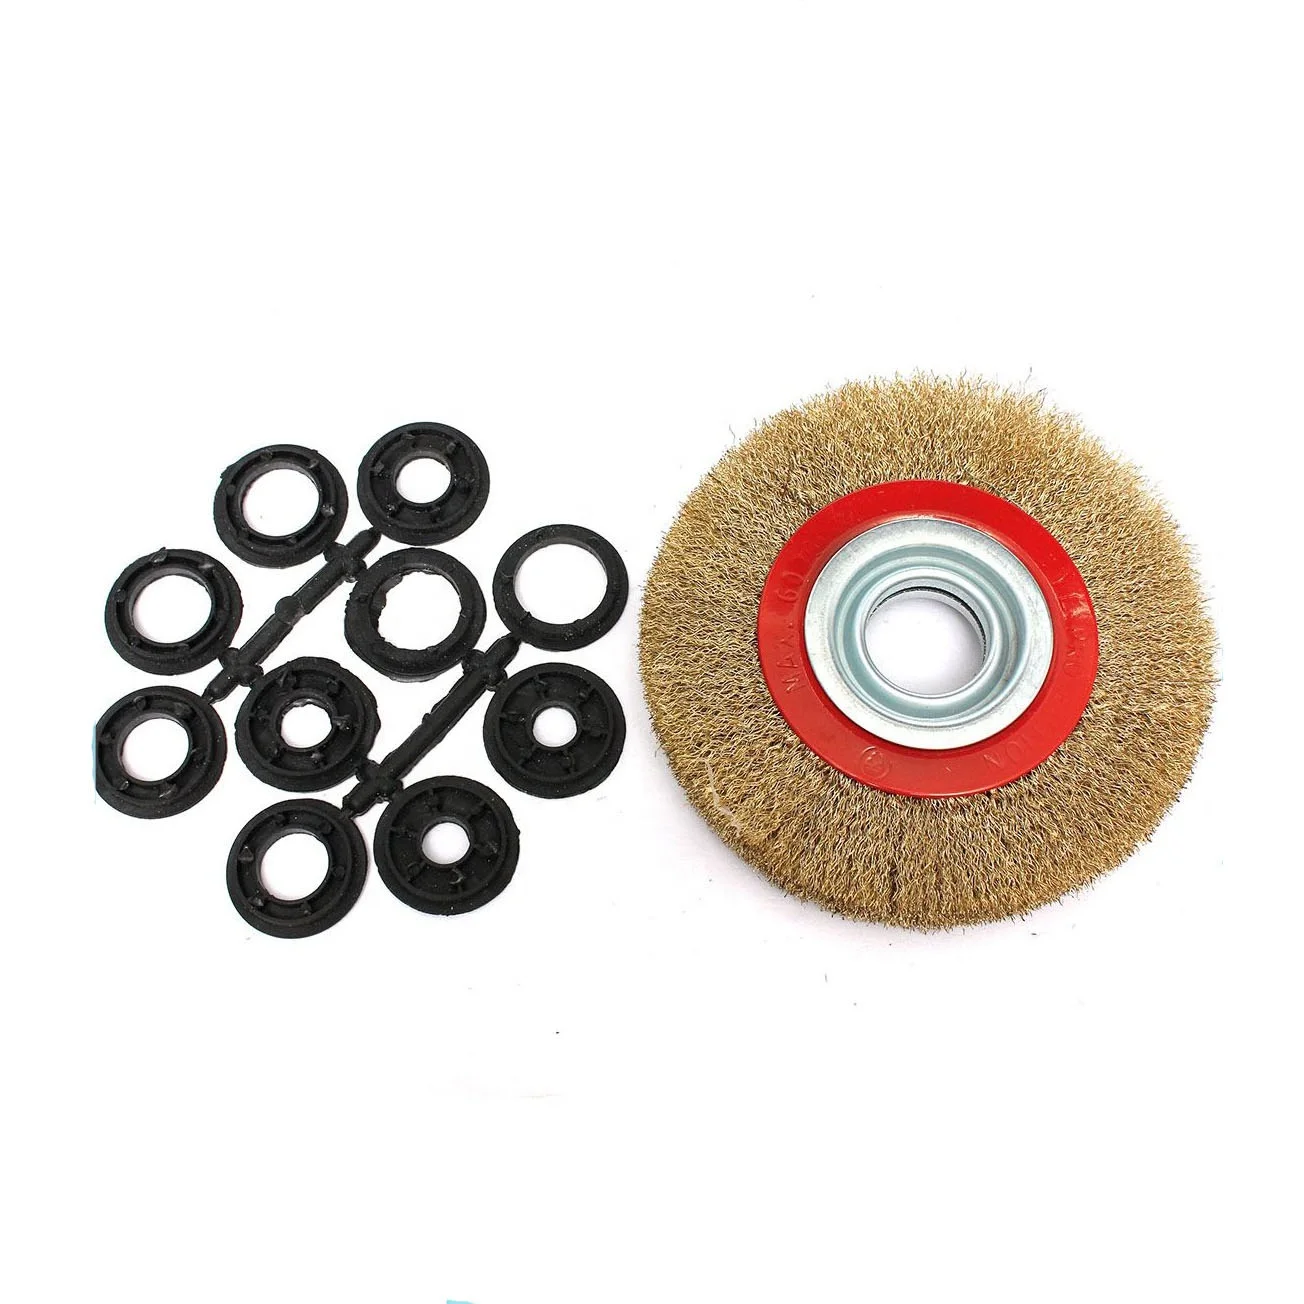 5 inch Crimped Circular Wire Brush Steel  Wheel Brush for Grinders